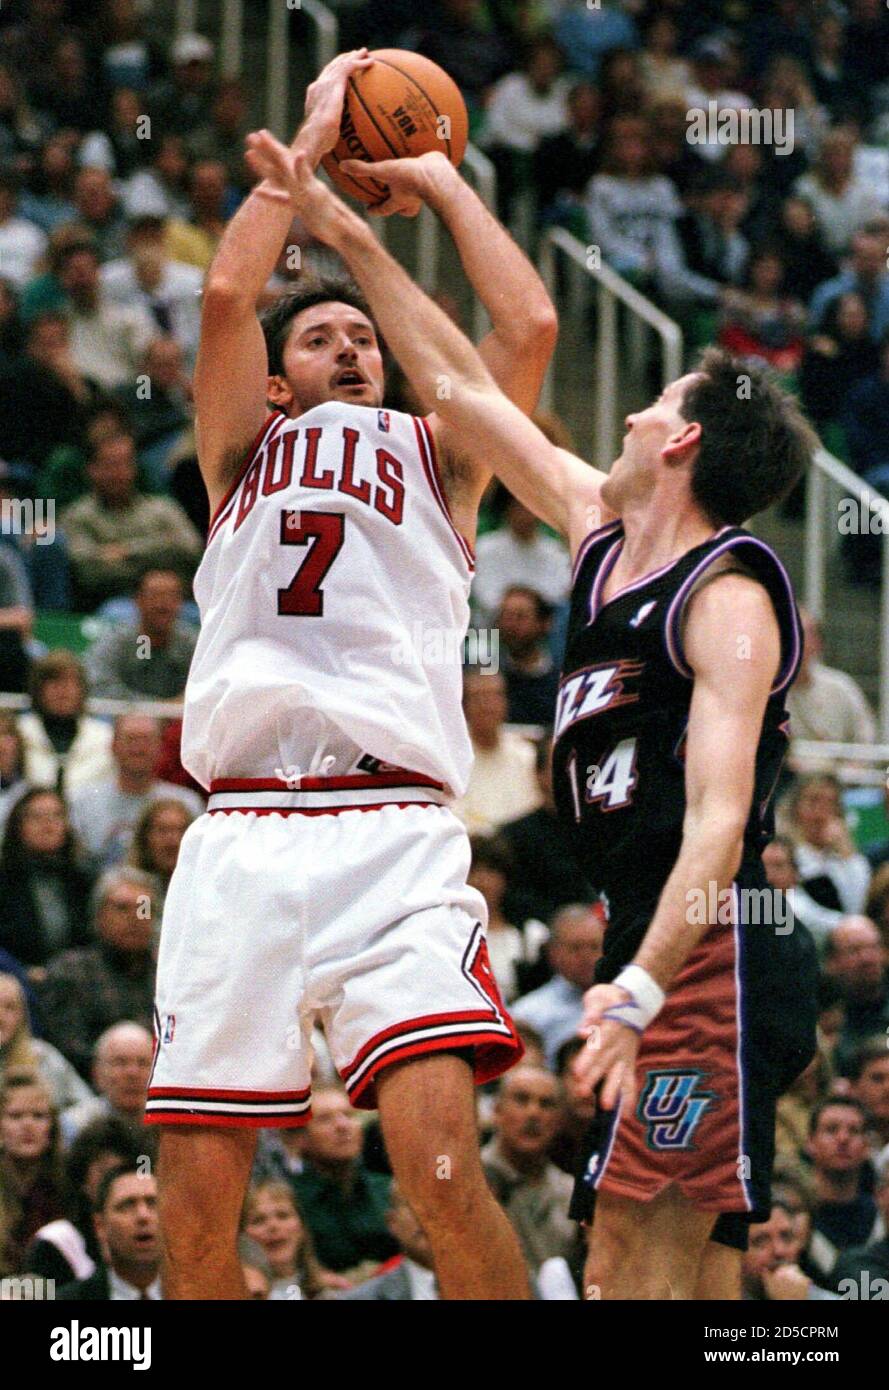 Chicago Bulls forward Tony Kukoc (L) puts up a three-pointer over Utah Jazz guard Jeff Hornacek during the fourth quarter of the season opener February 5. Kukoc finished with a game-high 32 points, but the Jazz beat the Bulls 104-96. scw/Photo by Steve C.  SW/RC/JDP Stock Photo